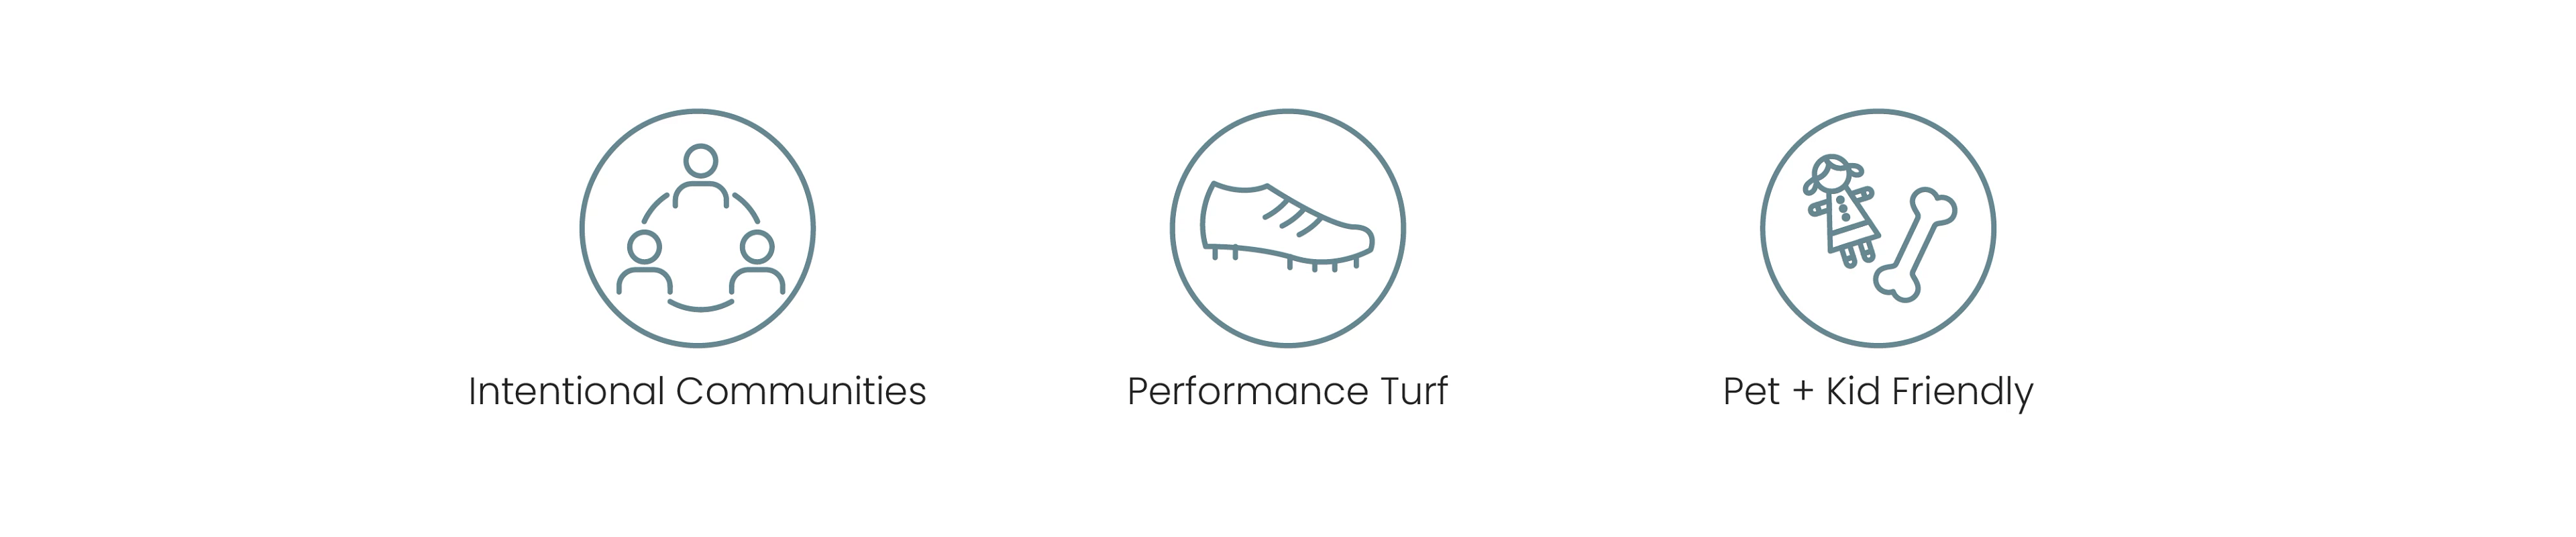 Performance Turf icons covering: Intentional Communities, Performance Turf, and Pet + Kid Friendly